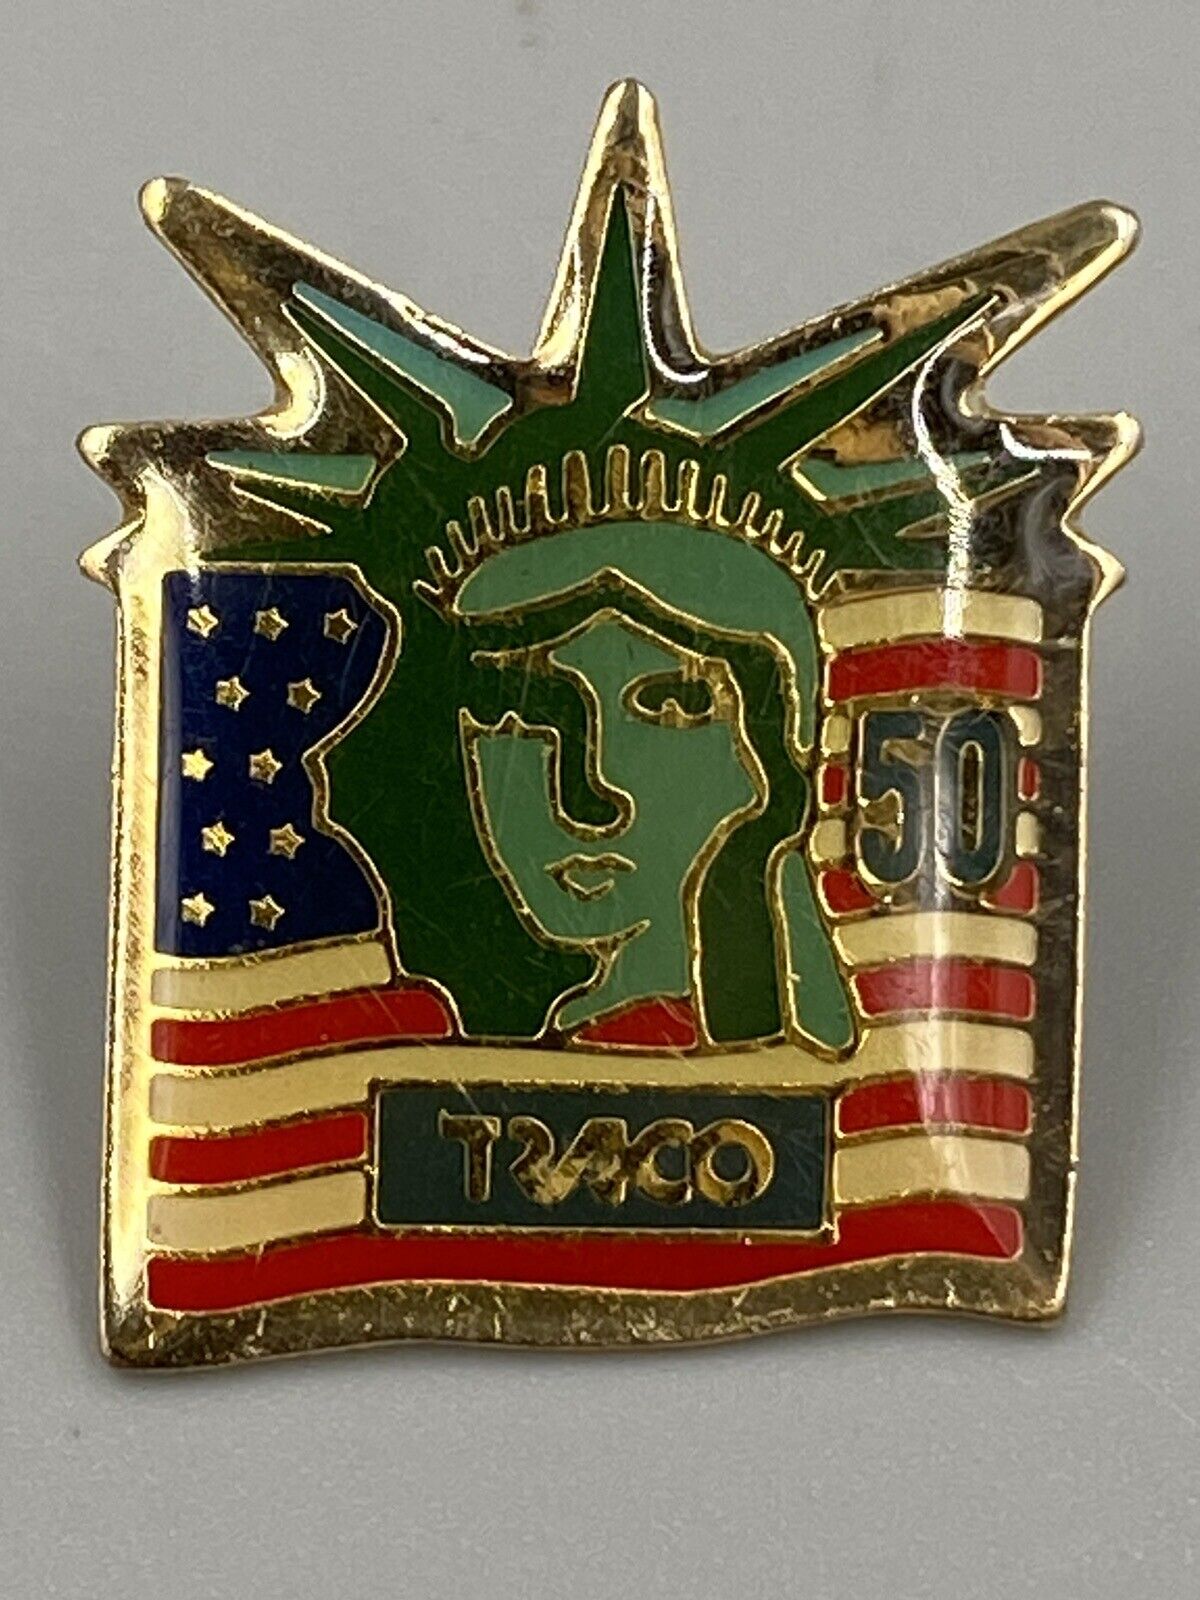 Vintage Statue Of Liberty US Flag TRACO Lapel Pin